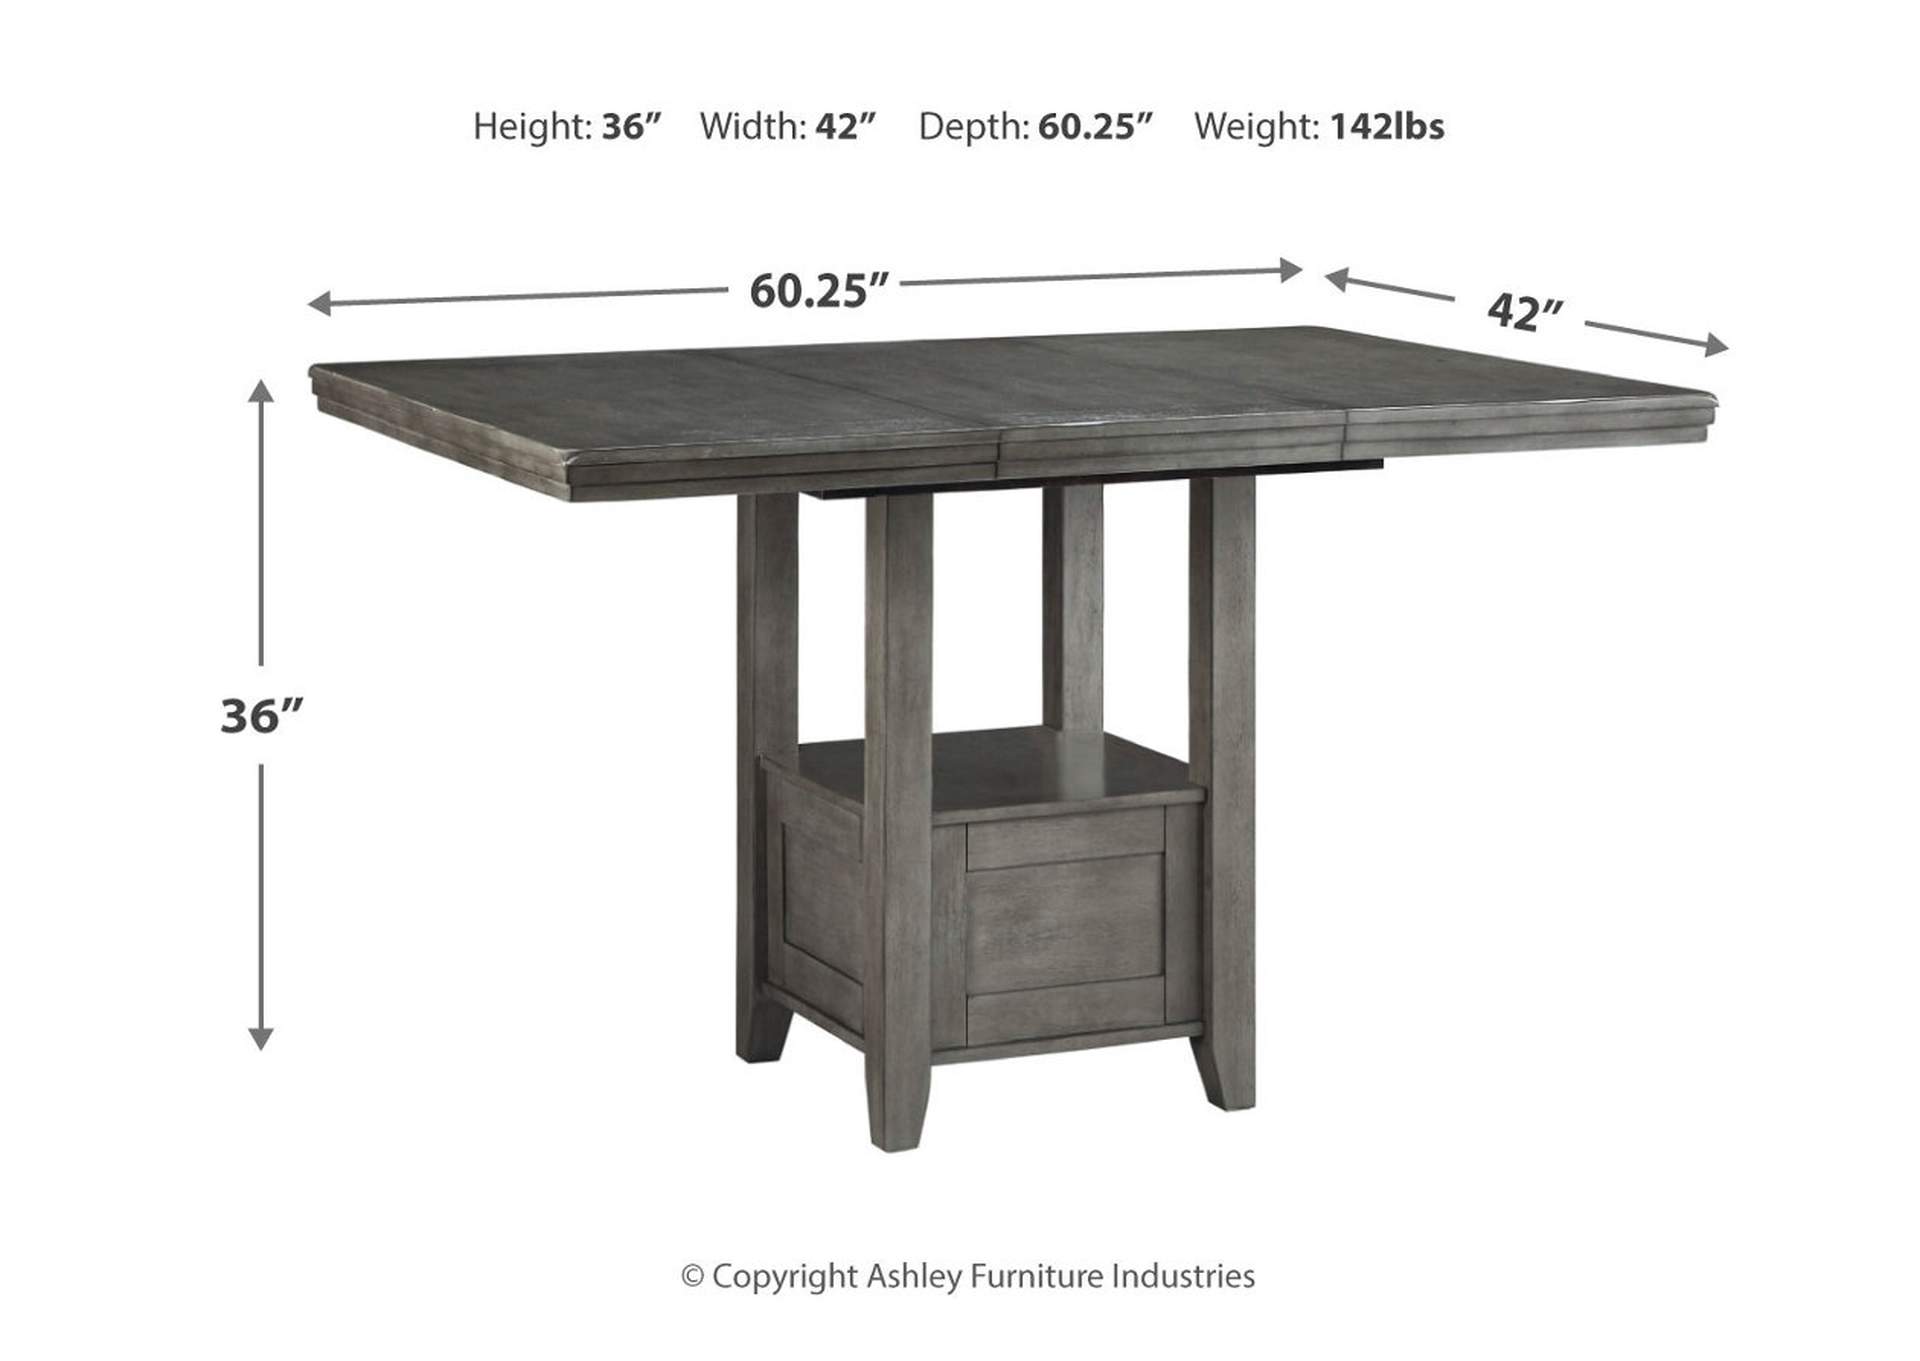 Hallanden Counter Height Dining Table and 4 Barstools with Storage,Signature Design By Ashley